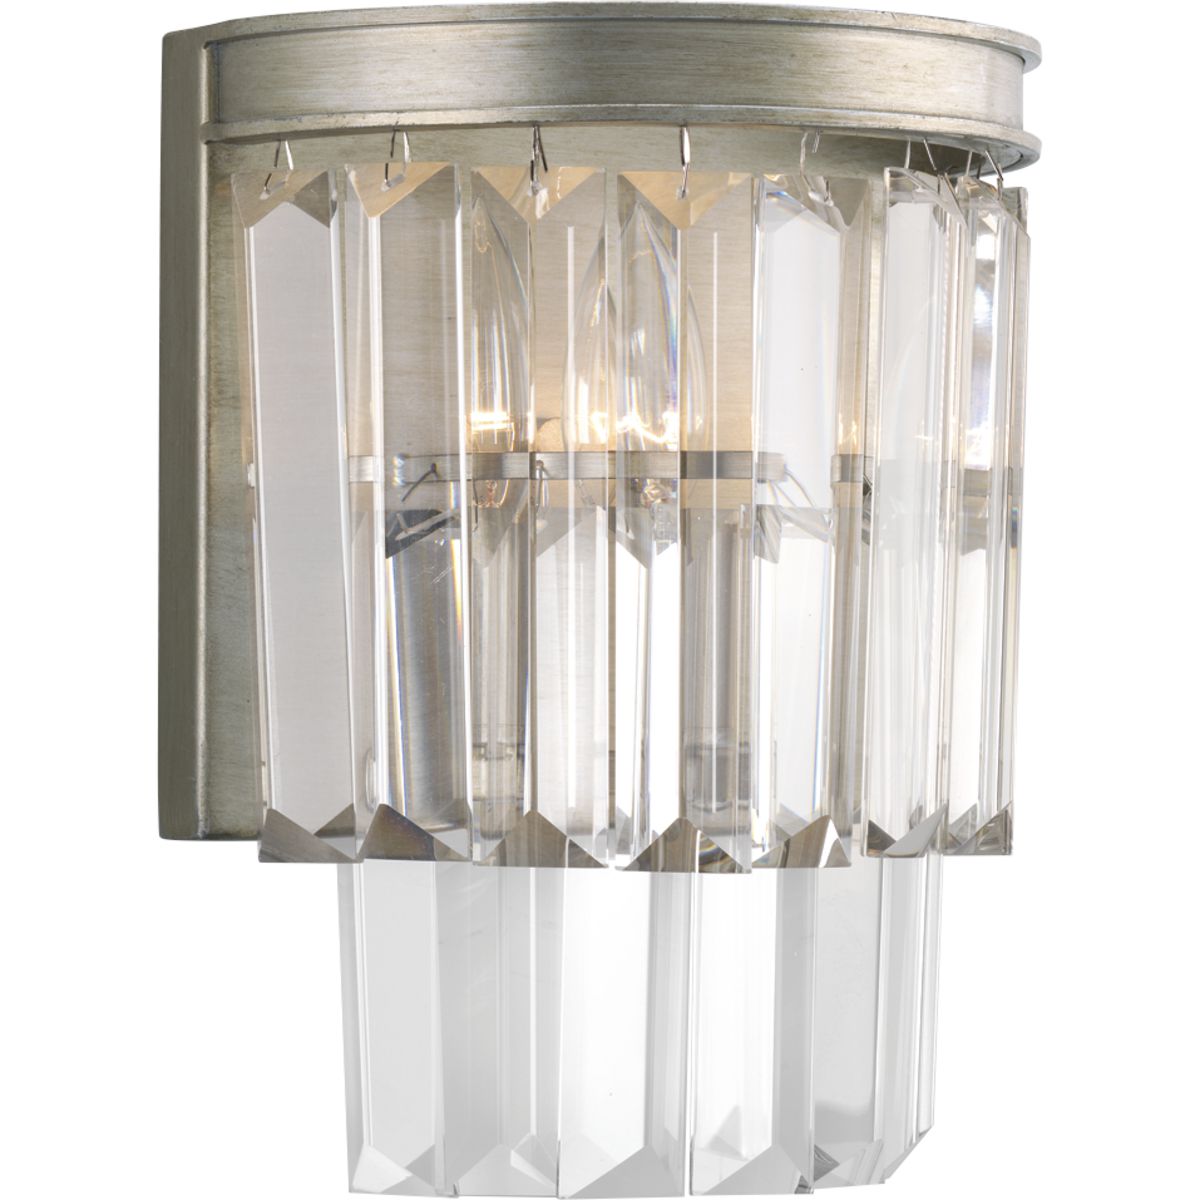 P7198-134 2-60W CAND WALL SCONCE